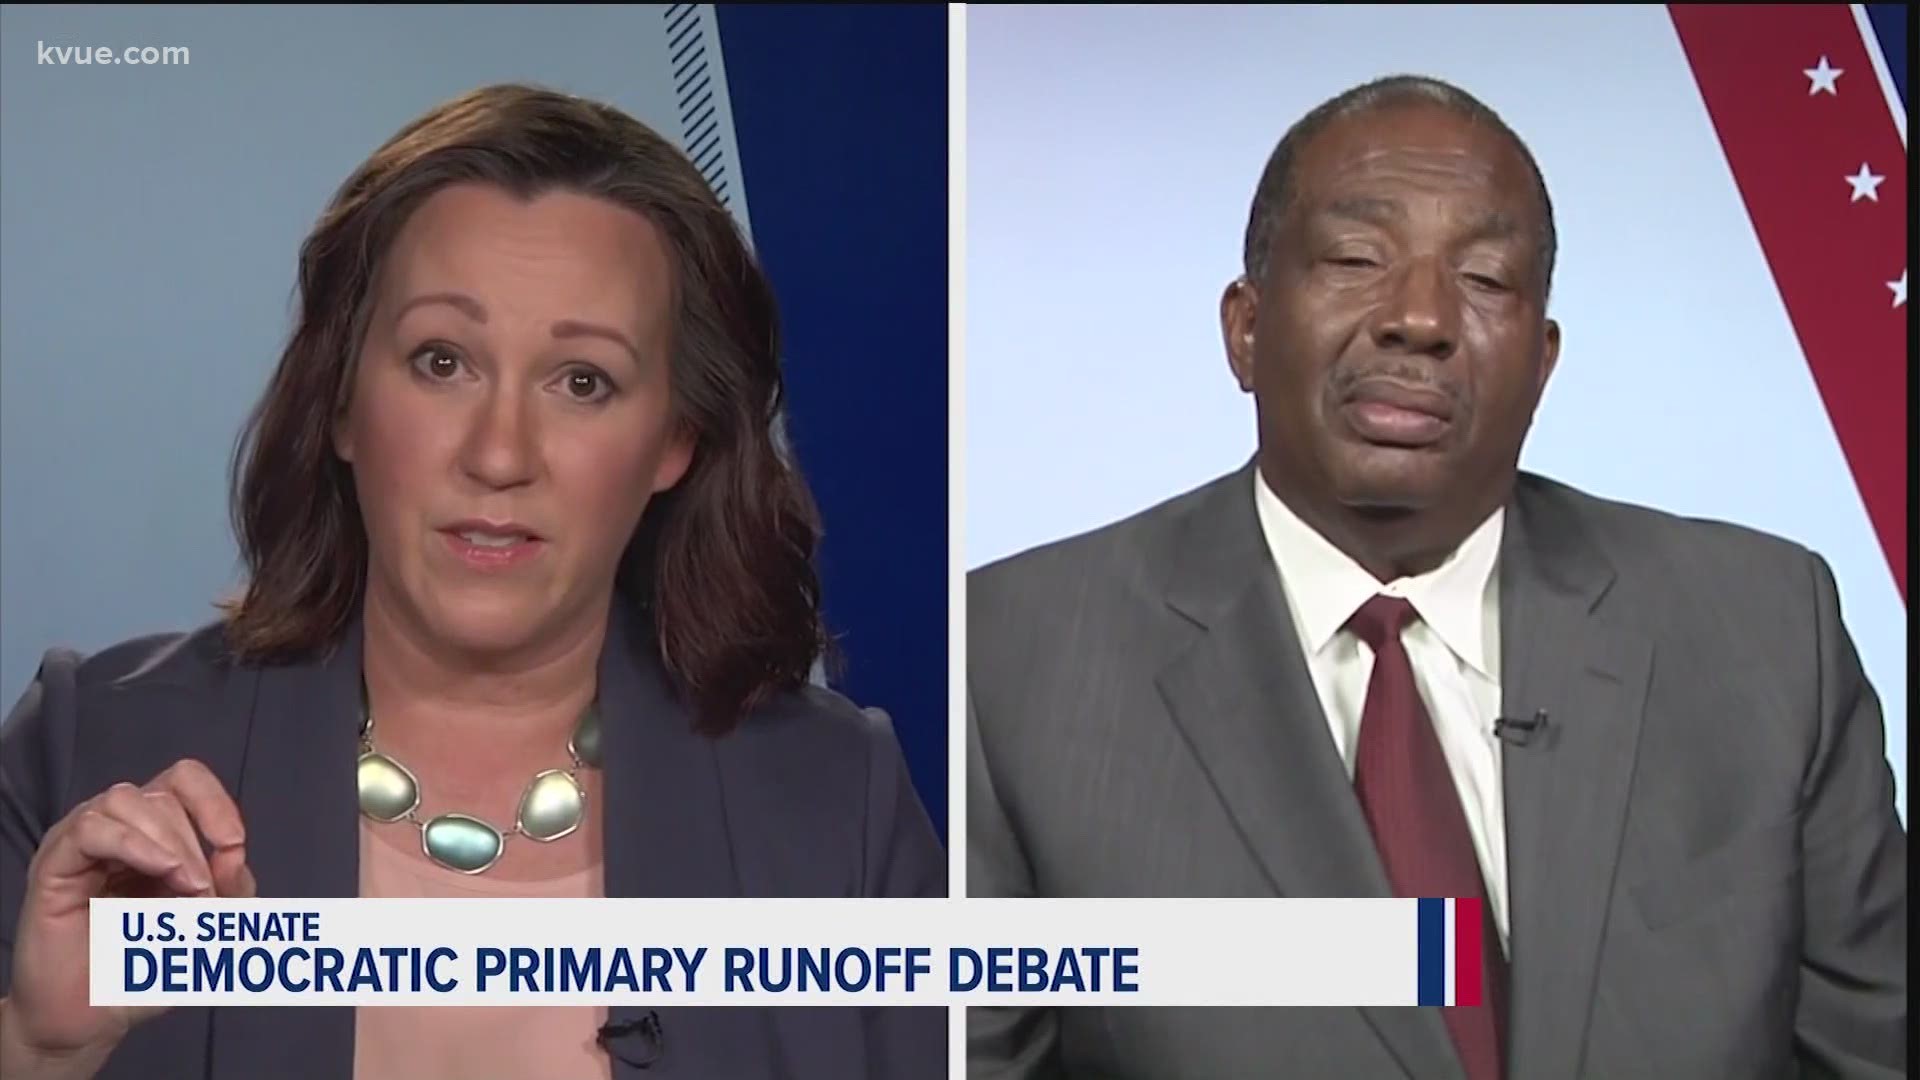 The somewhat sleepy Senate race turned into a heated battle, with the candidates not holding back any punches during KVUE's debate.